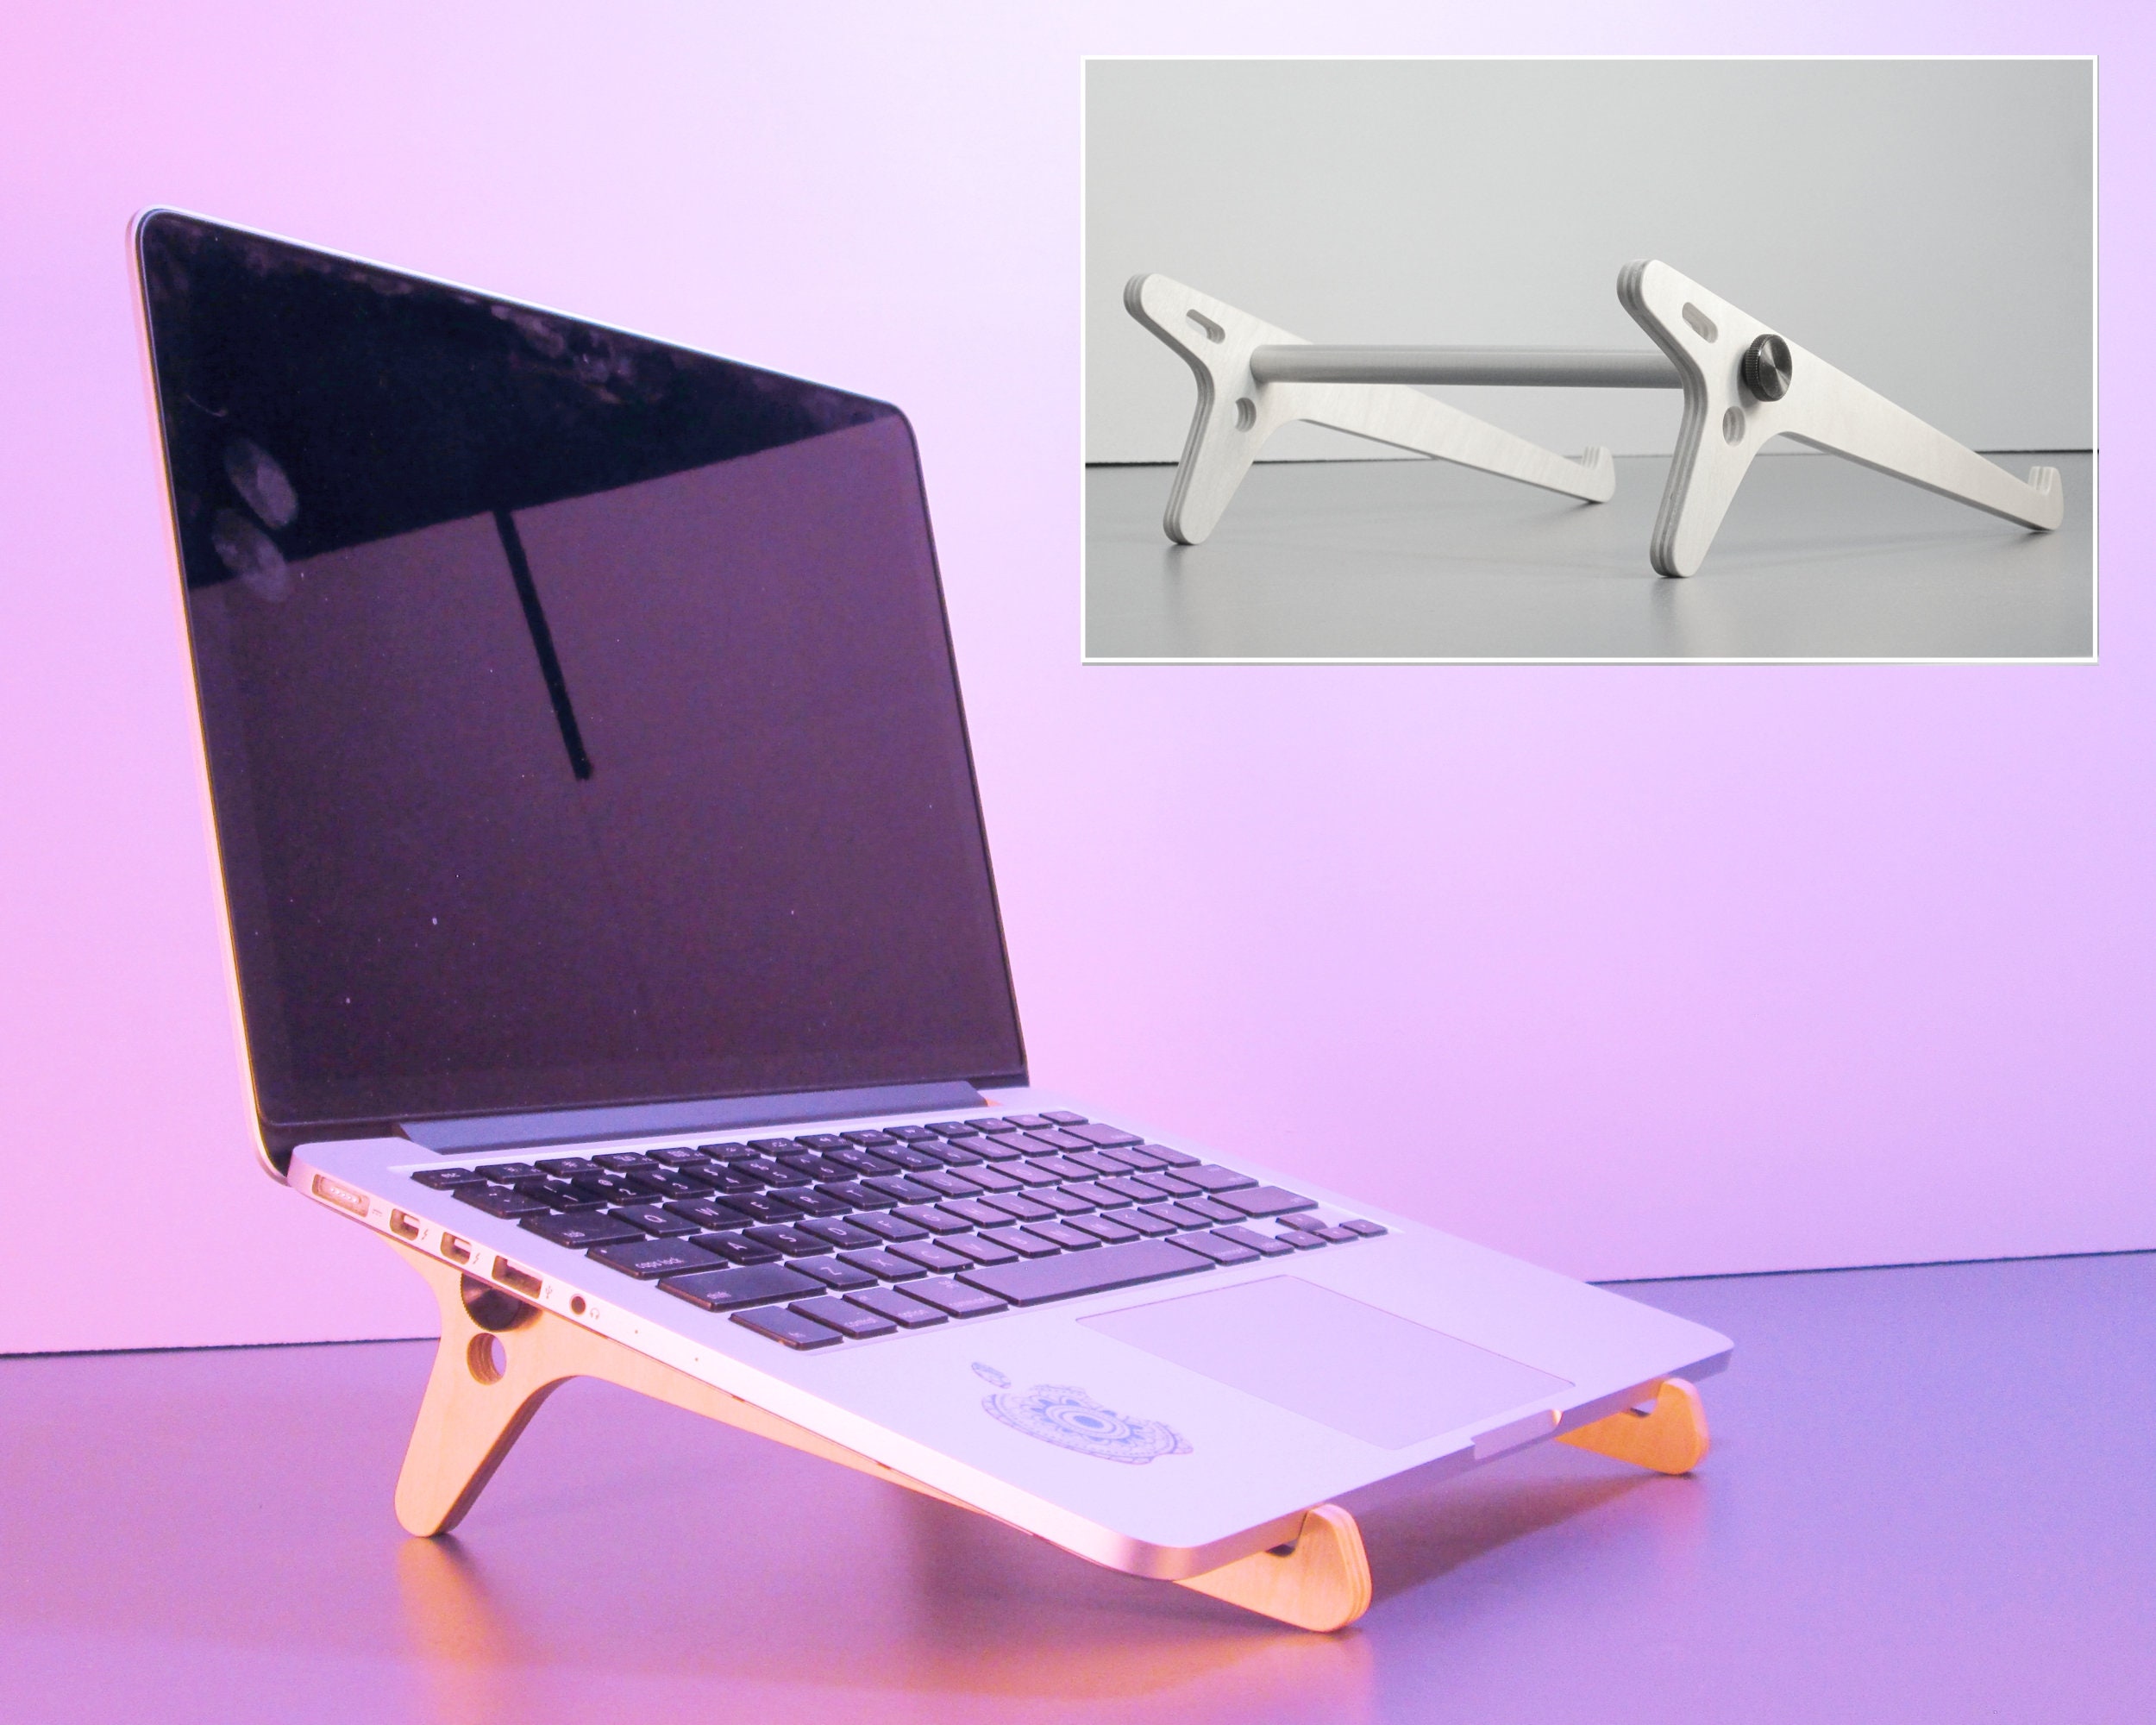 Laptop Vertical Storage Support Walnut Wood for Ipad, Macbook, & Other Thin  Laptop 